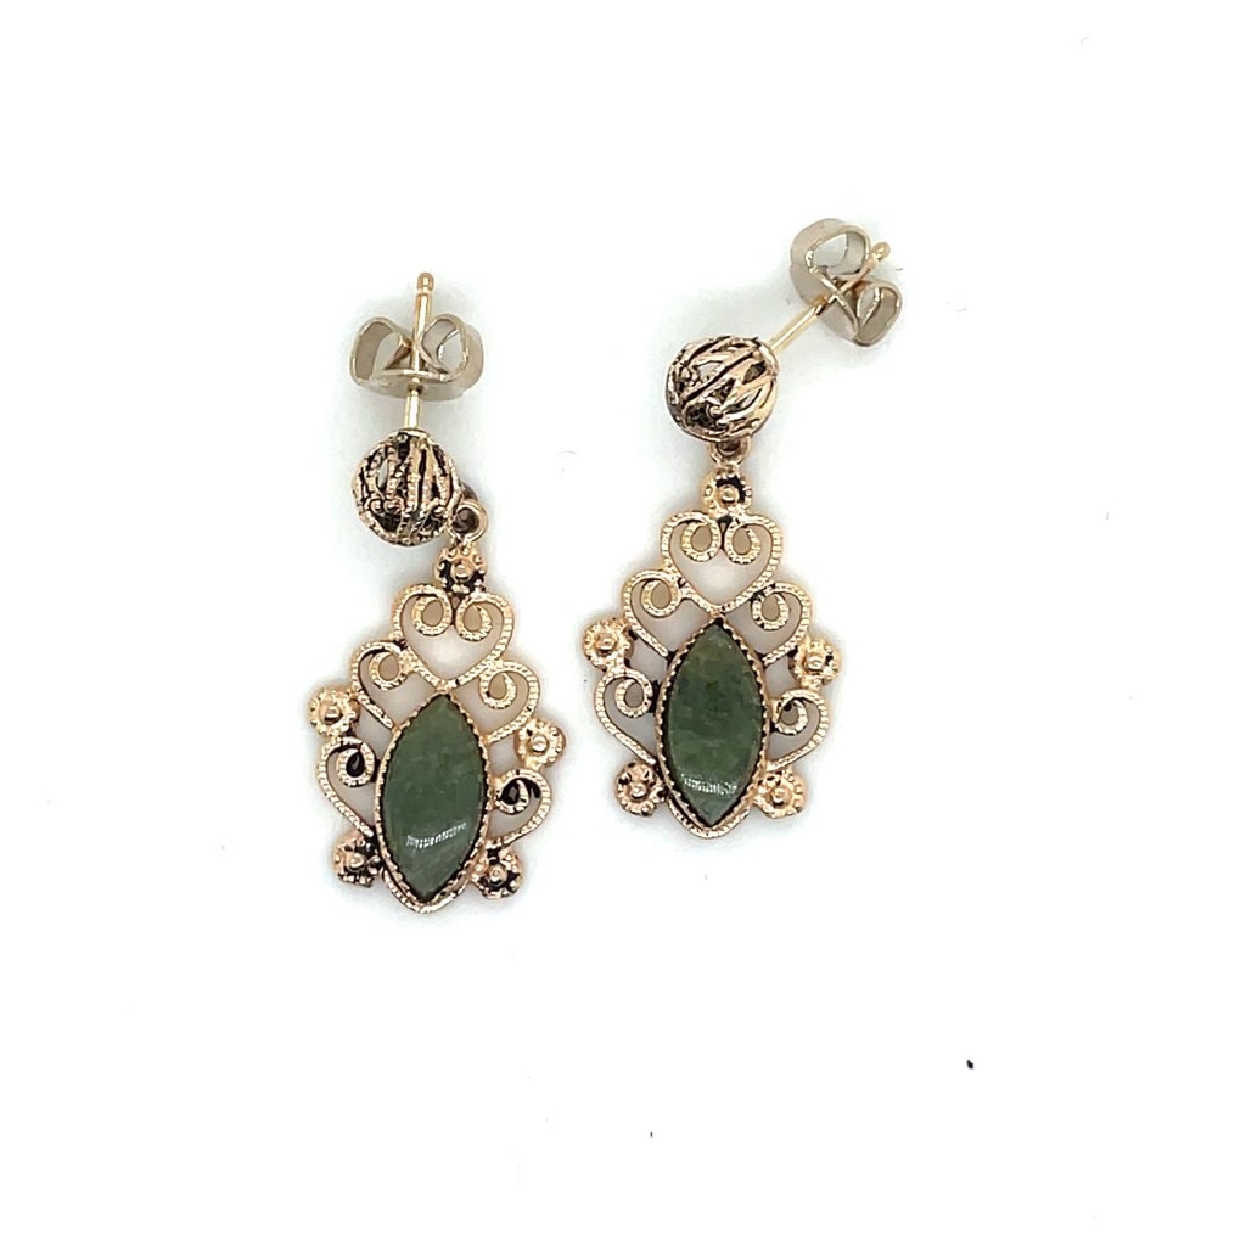 14K Yellow Gold Oval Jade Stud Earrings with Filigree Detailing